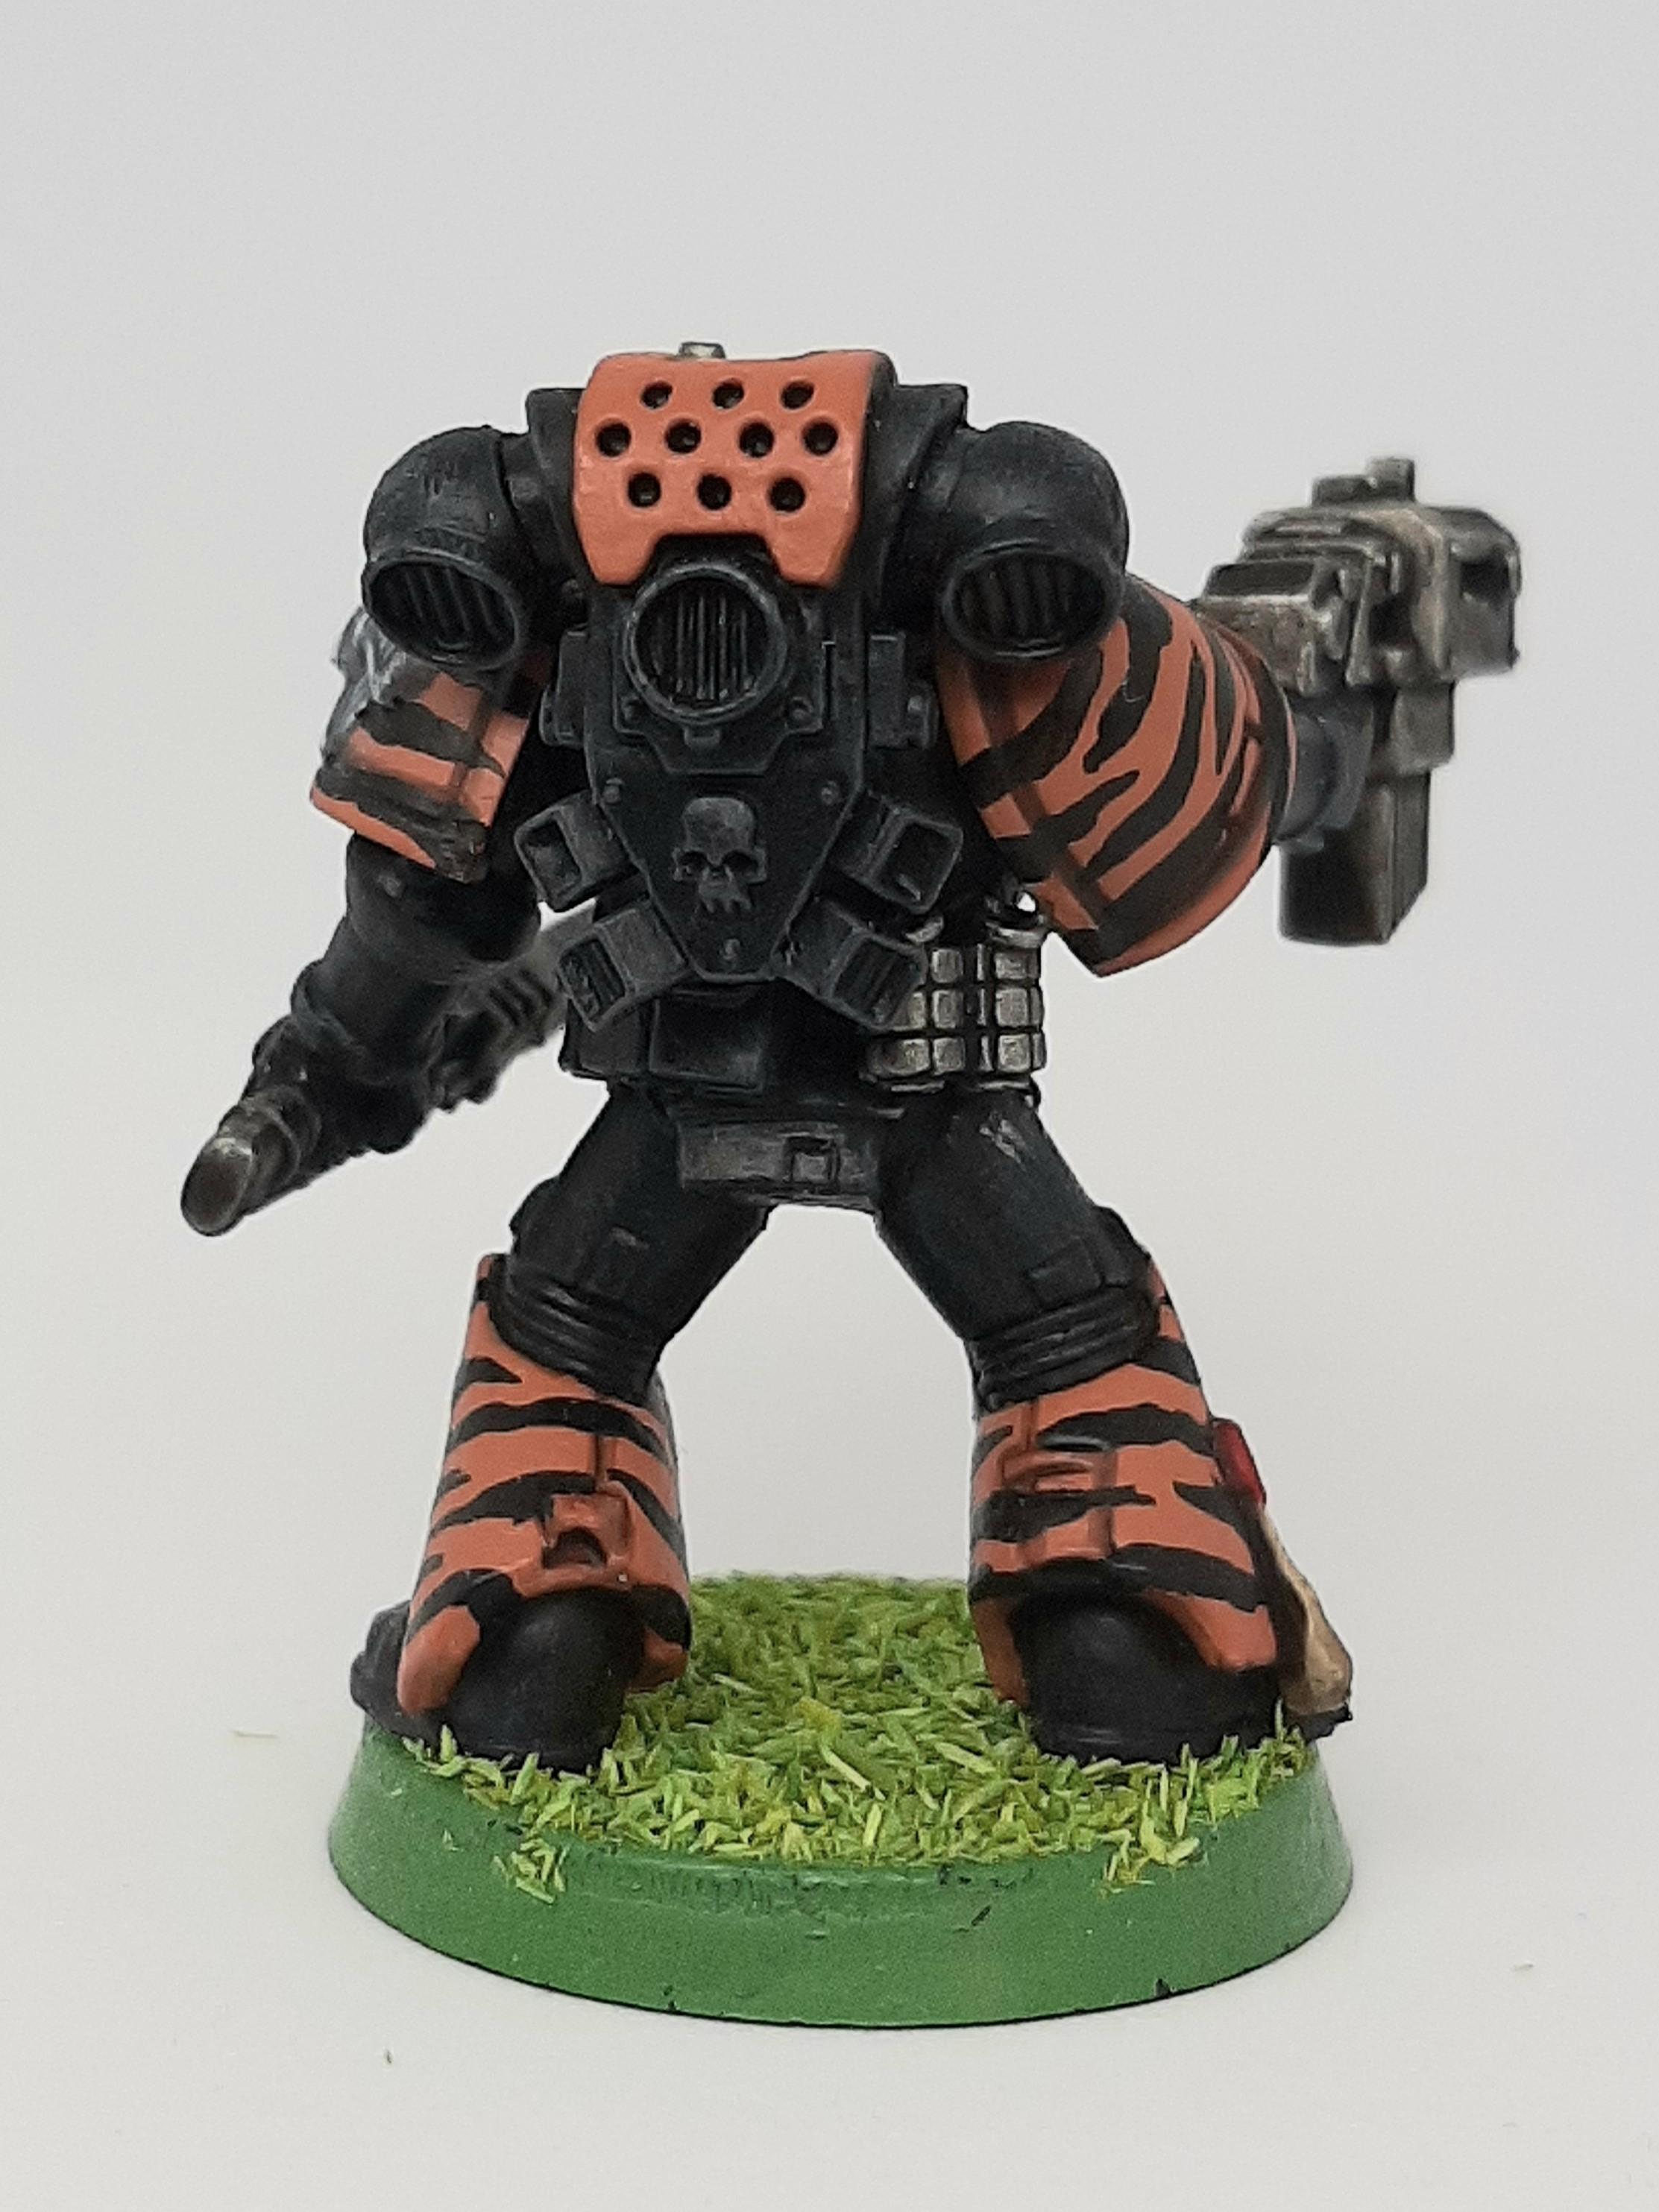 Adeptus, Astartes, Camouflage, Conversion, Custom, Fighting, Forest, Jungle, Kitbash, Space, Space Marines, Tigers, Veda